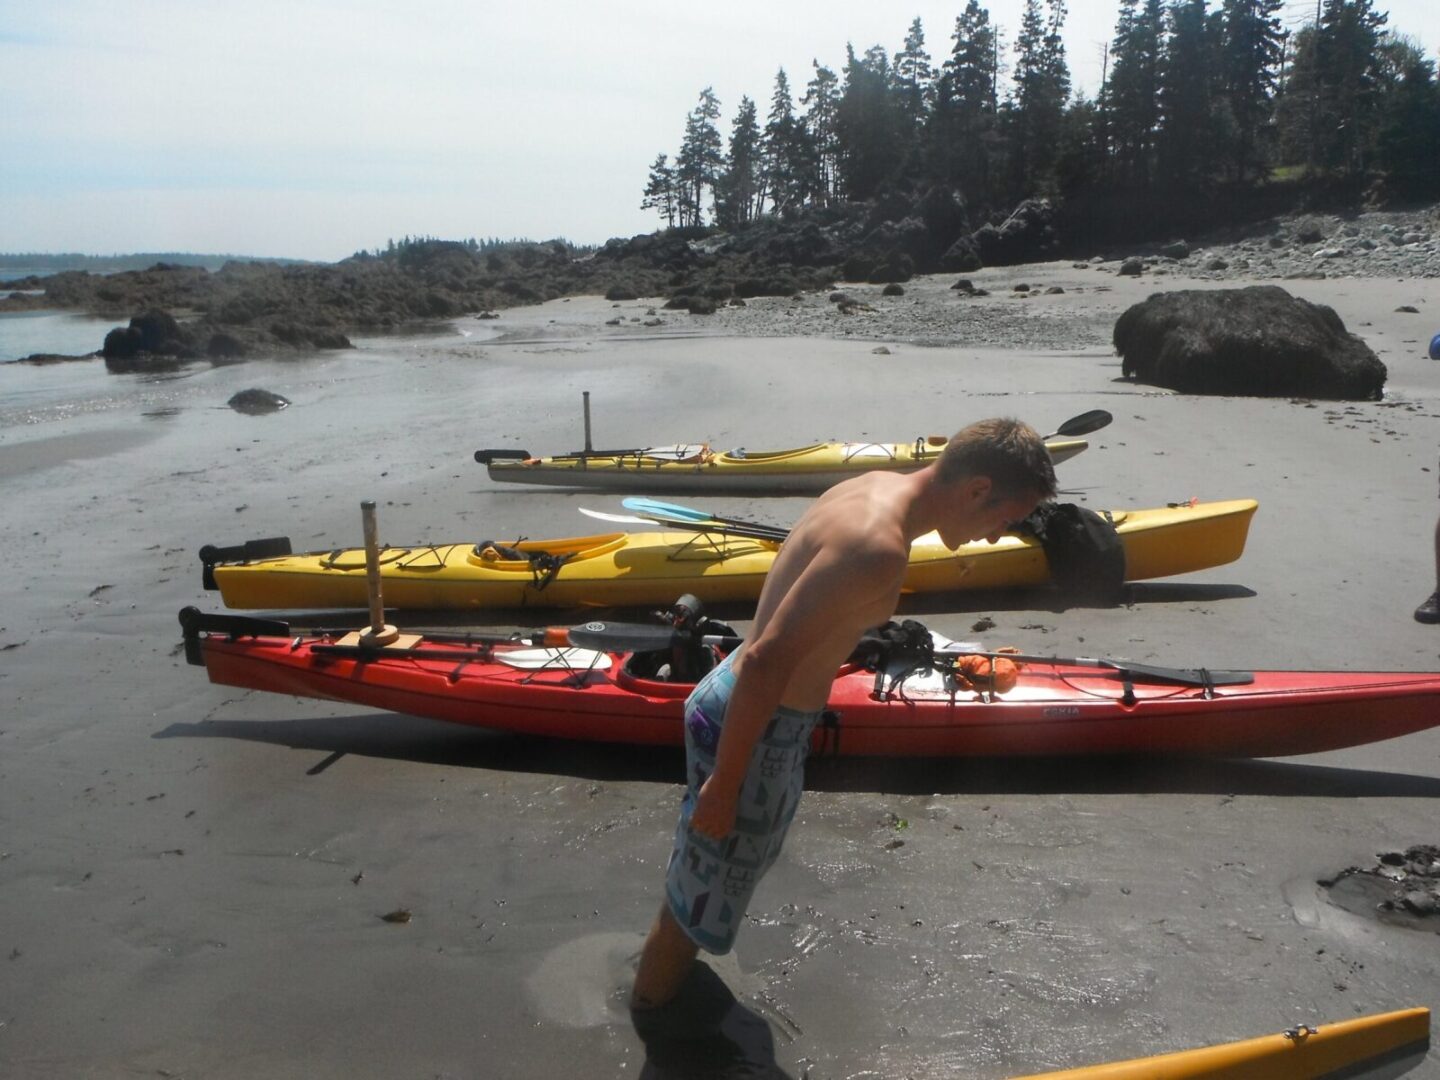 A man standing next to a group of kayaks on a beach.